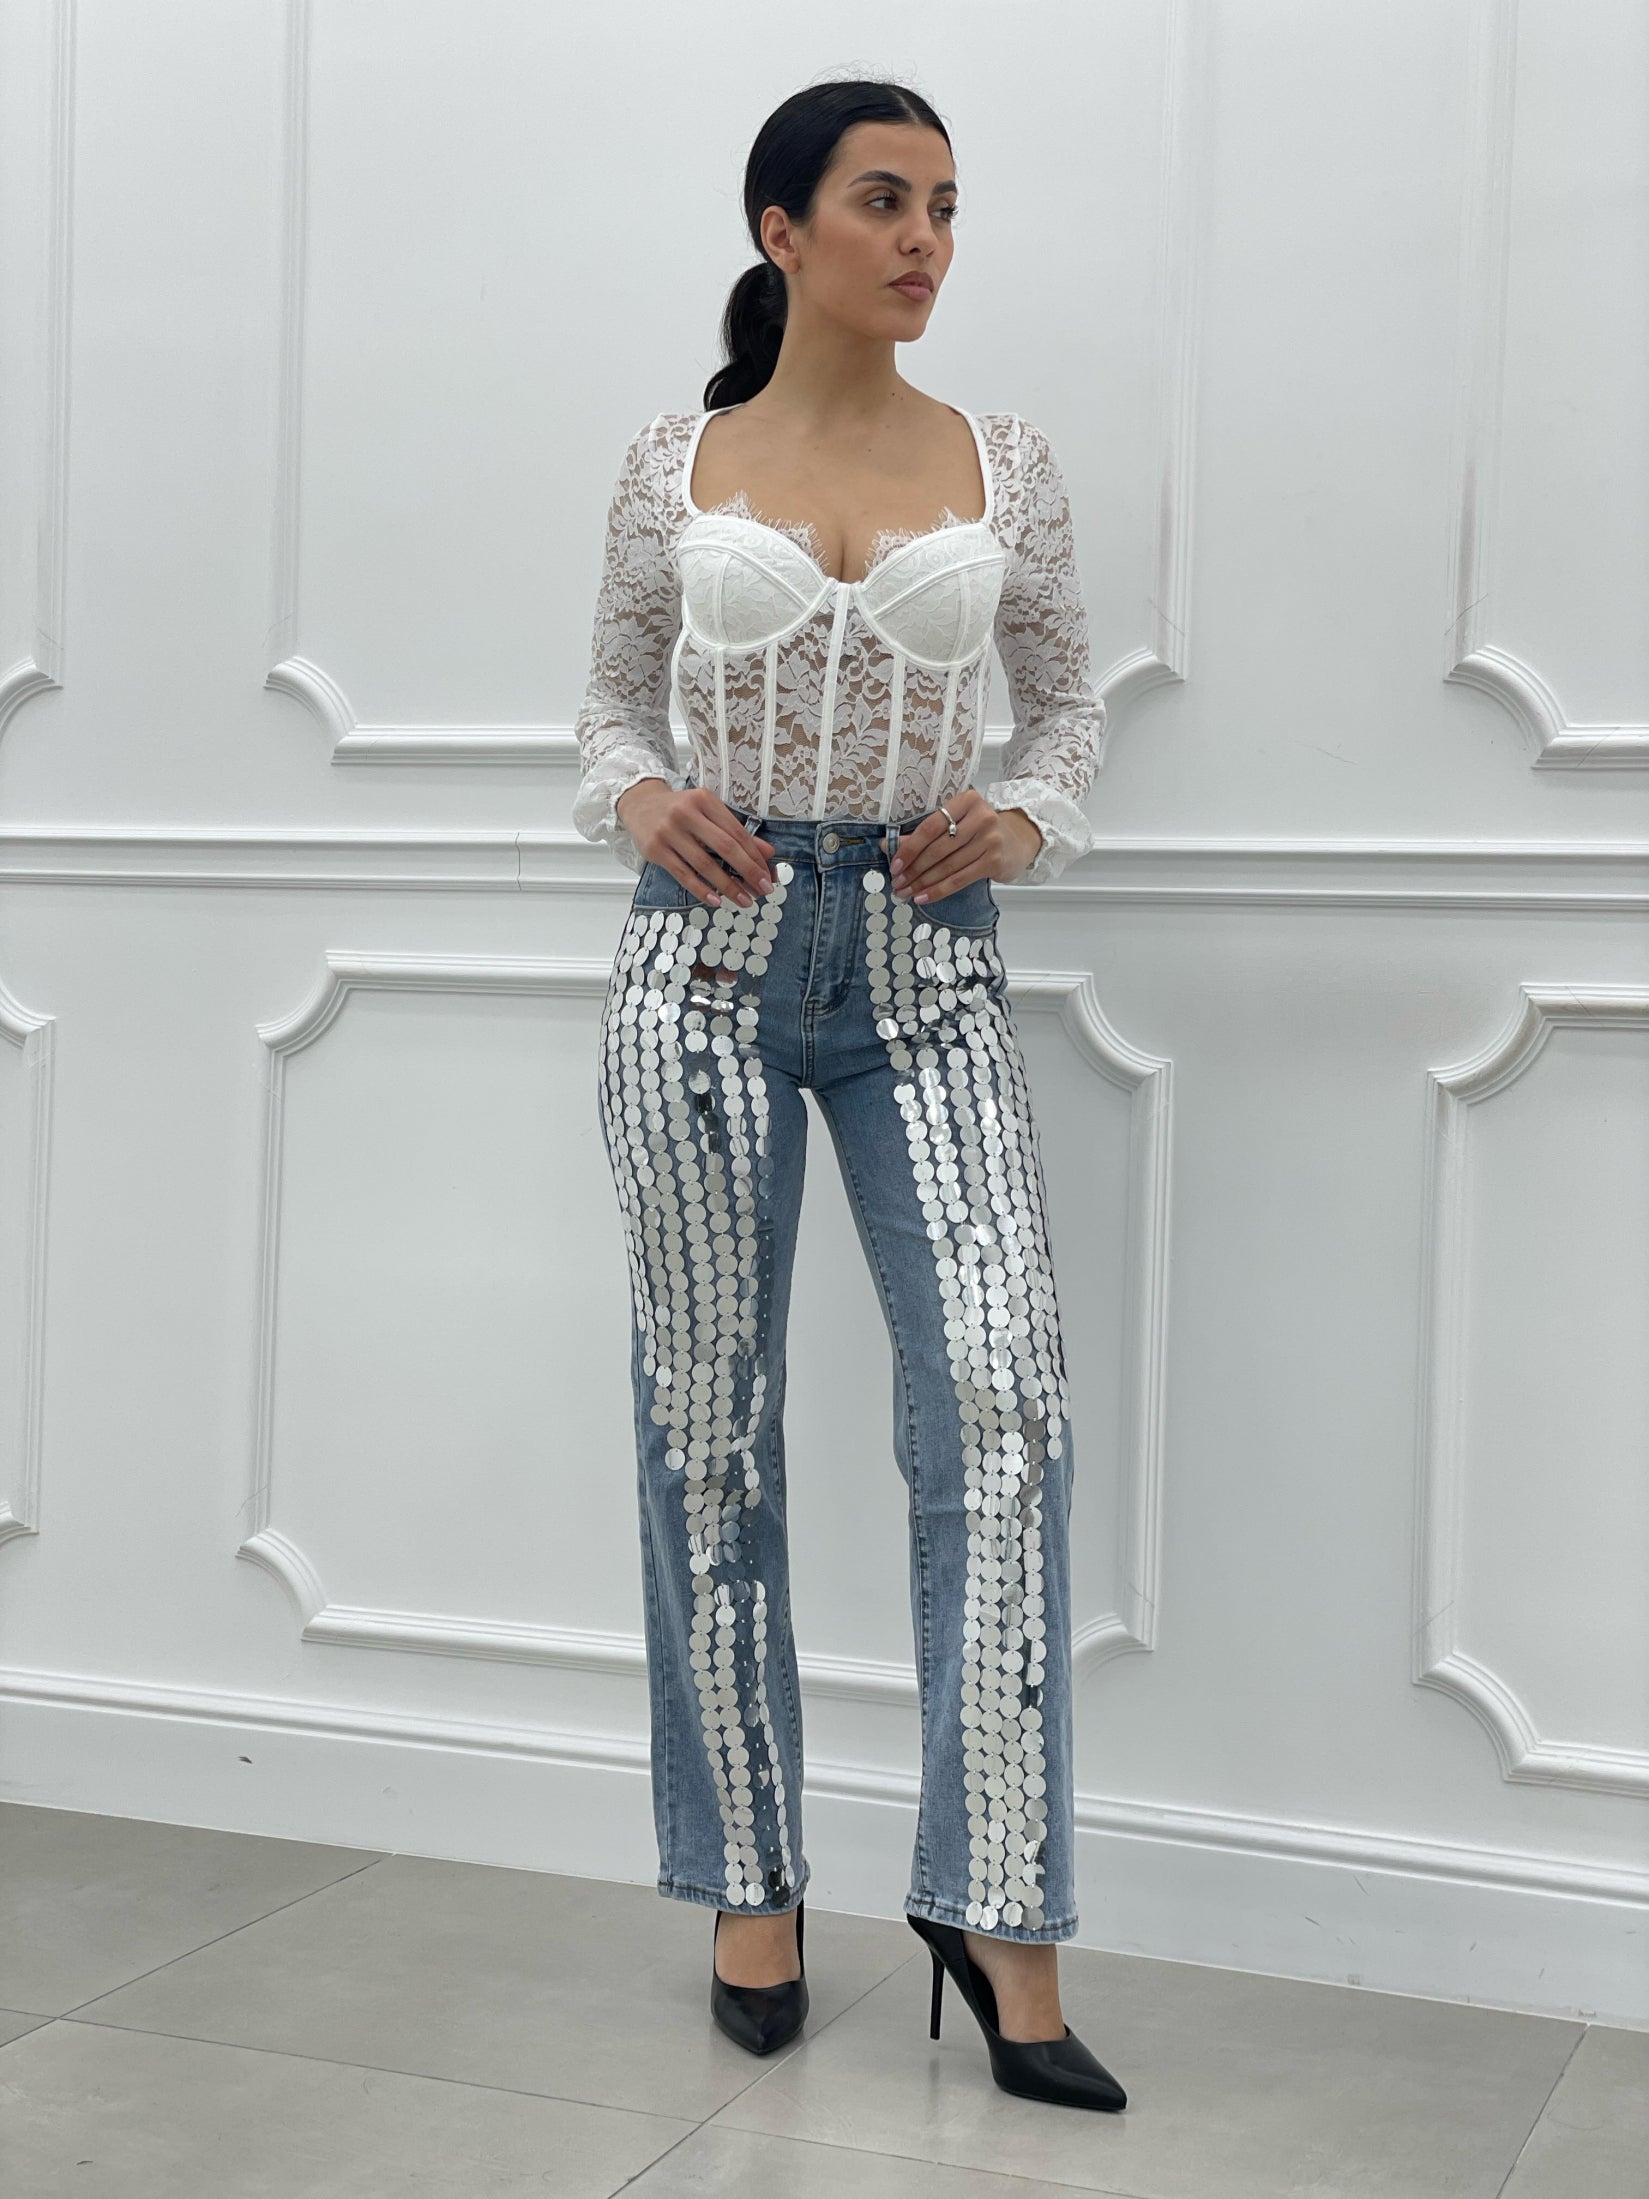 58252-JEANS-PALAZZO-CON-PAILLETTES-NEW-COLLECTION-JEANS-PALAZZO-CON-PAILLETTES-NEW-COLLECTION.jpg